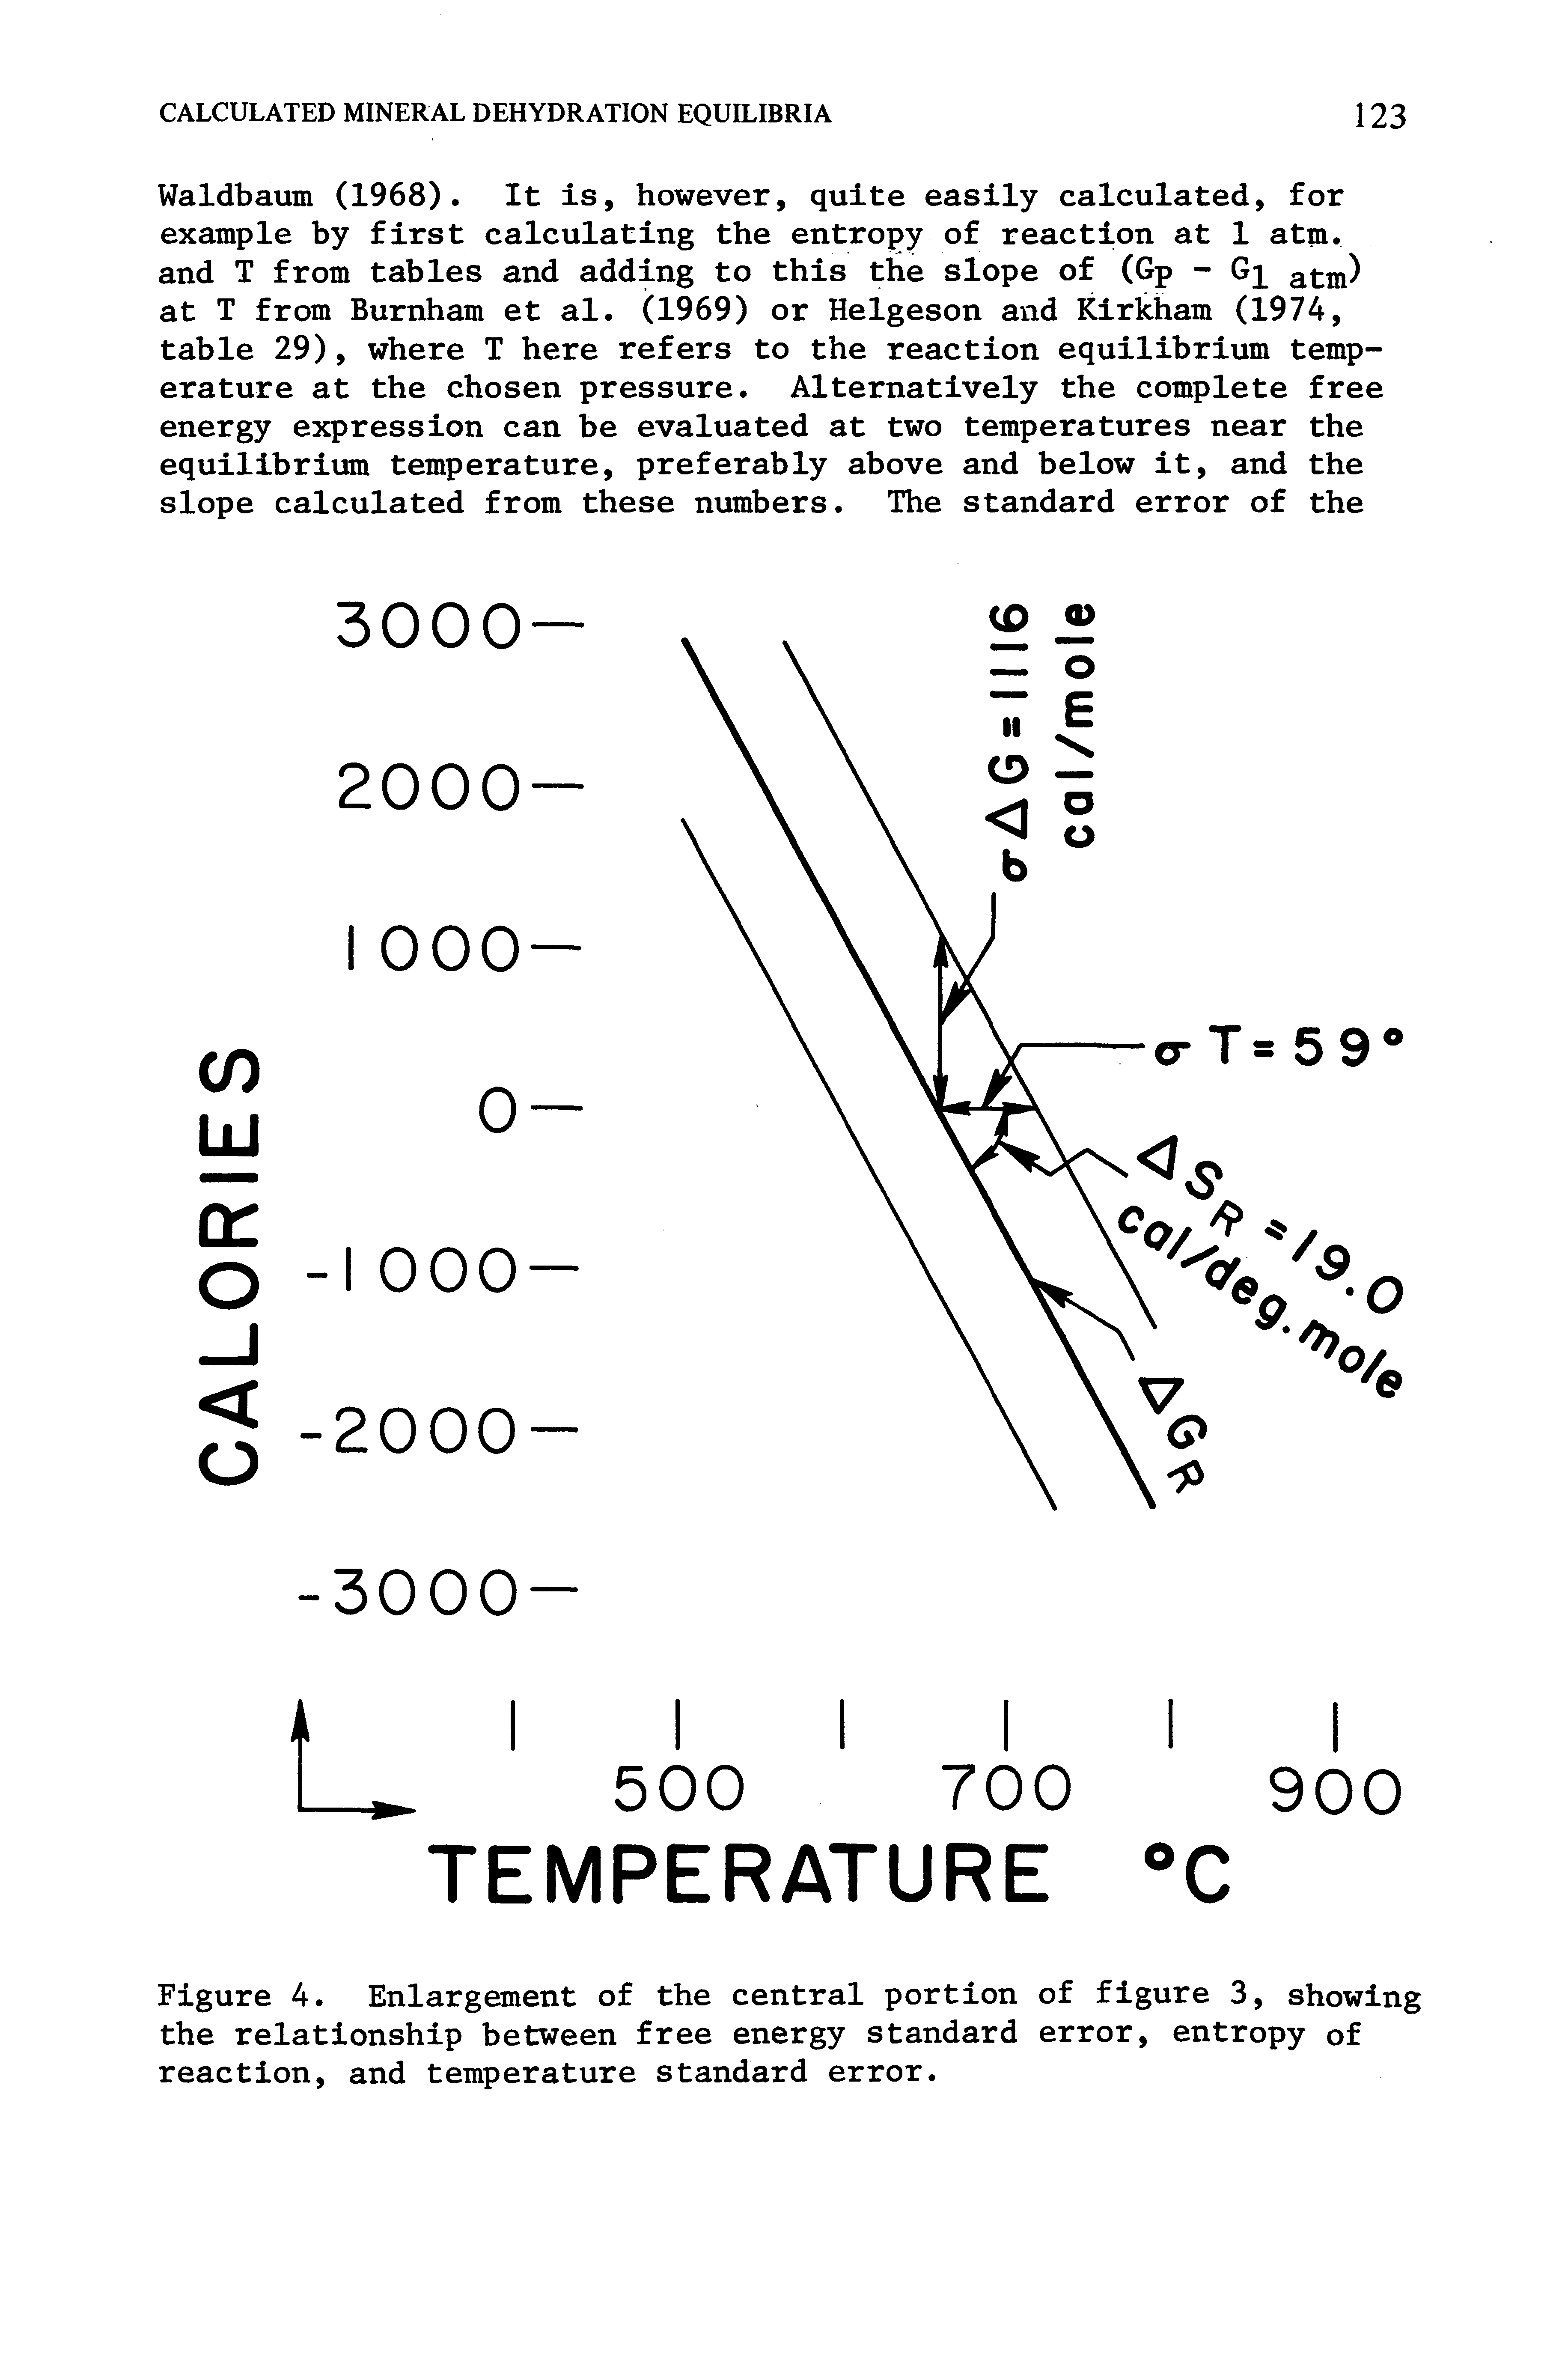 Figure 4. Enlargement of the central portion of figure 3, showing the relationship between free energy standard error, entropy of reaction, and temperature standard error.